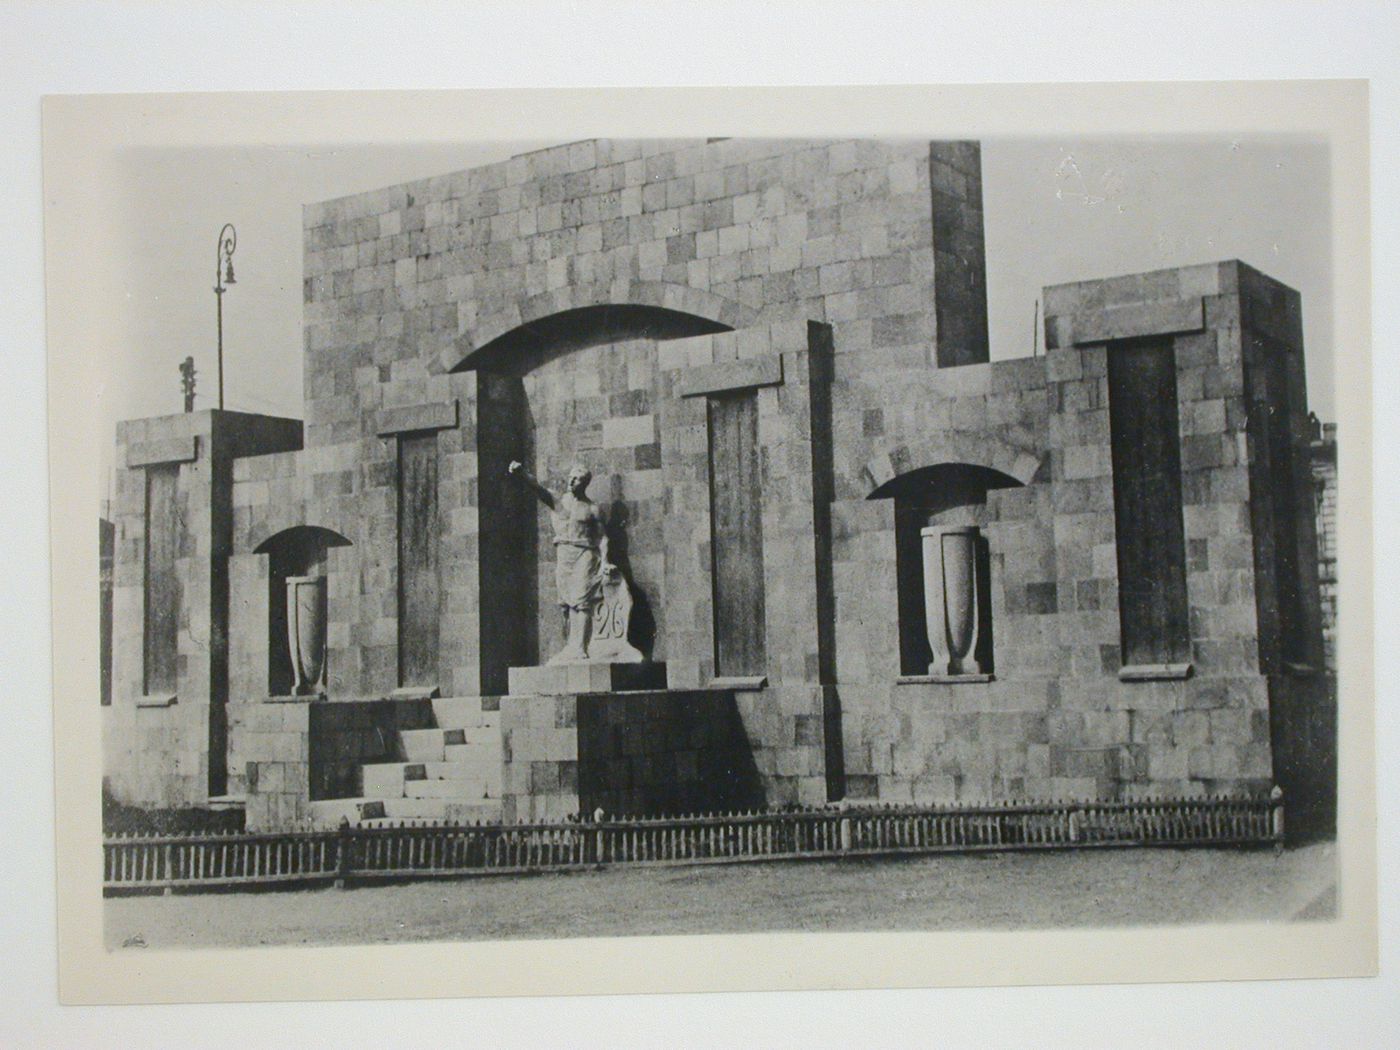 View of the monument to the 26 Baku Commissars in Baku, Soviet Union (now in Azerbaijan)